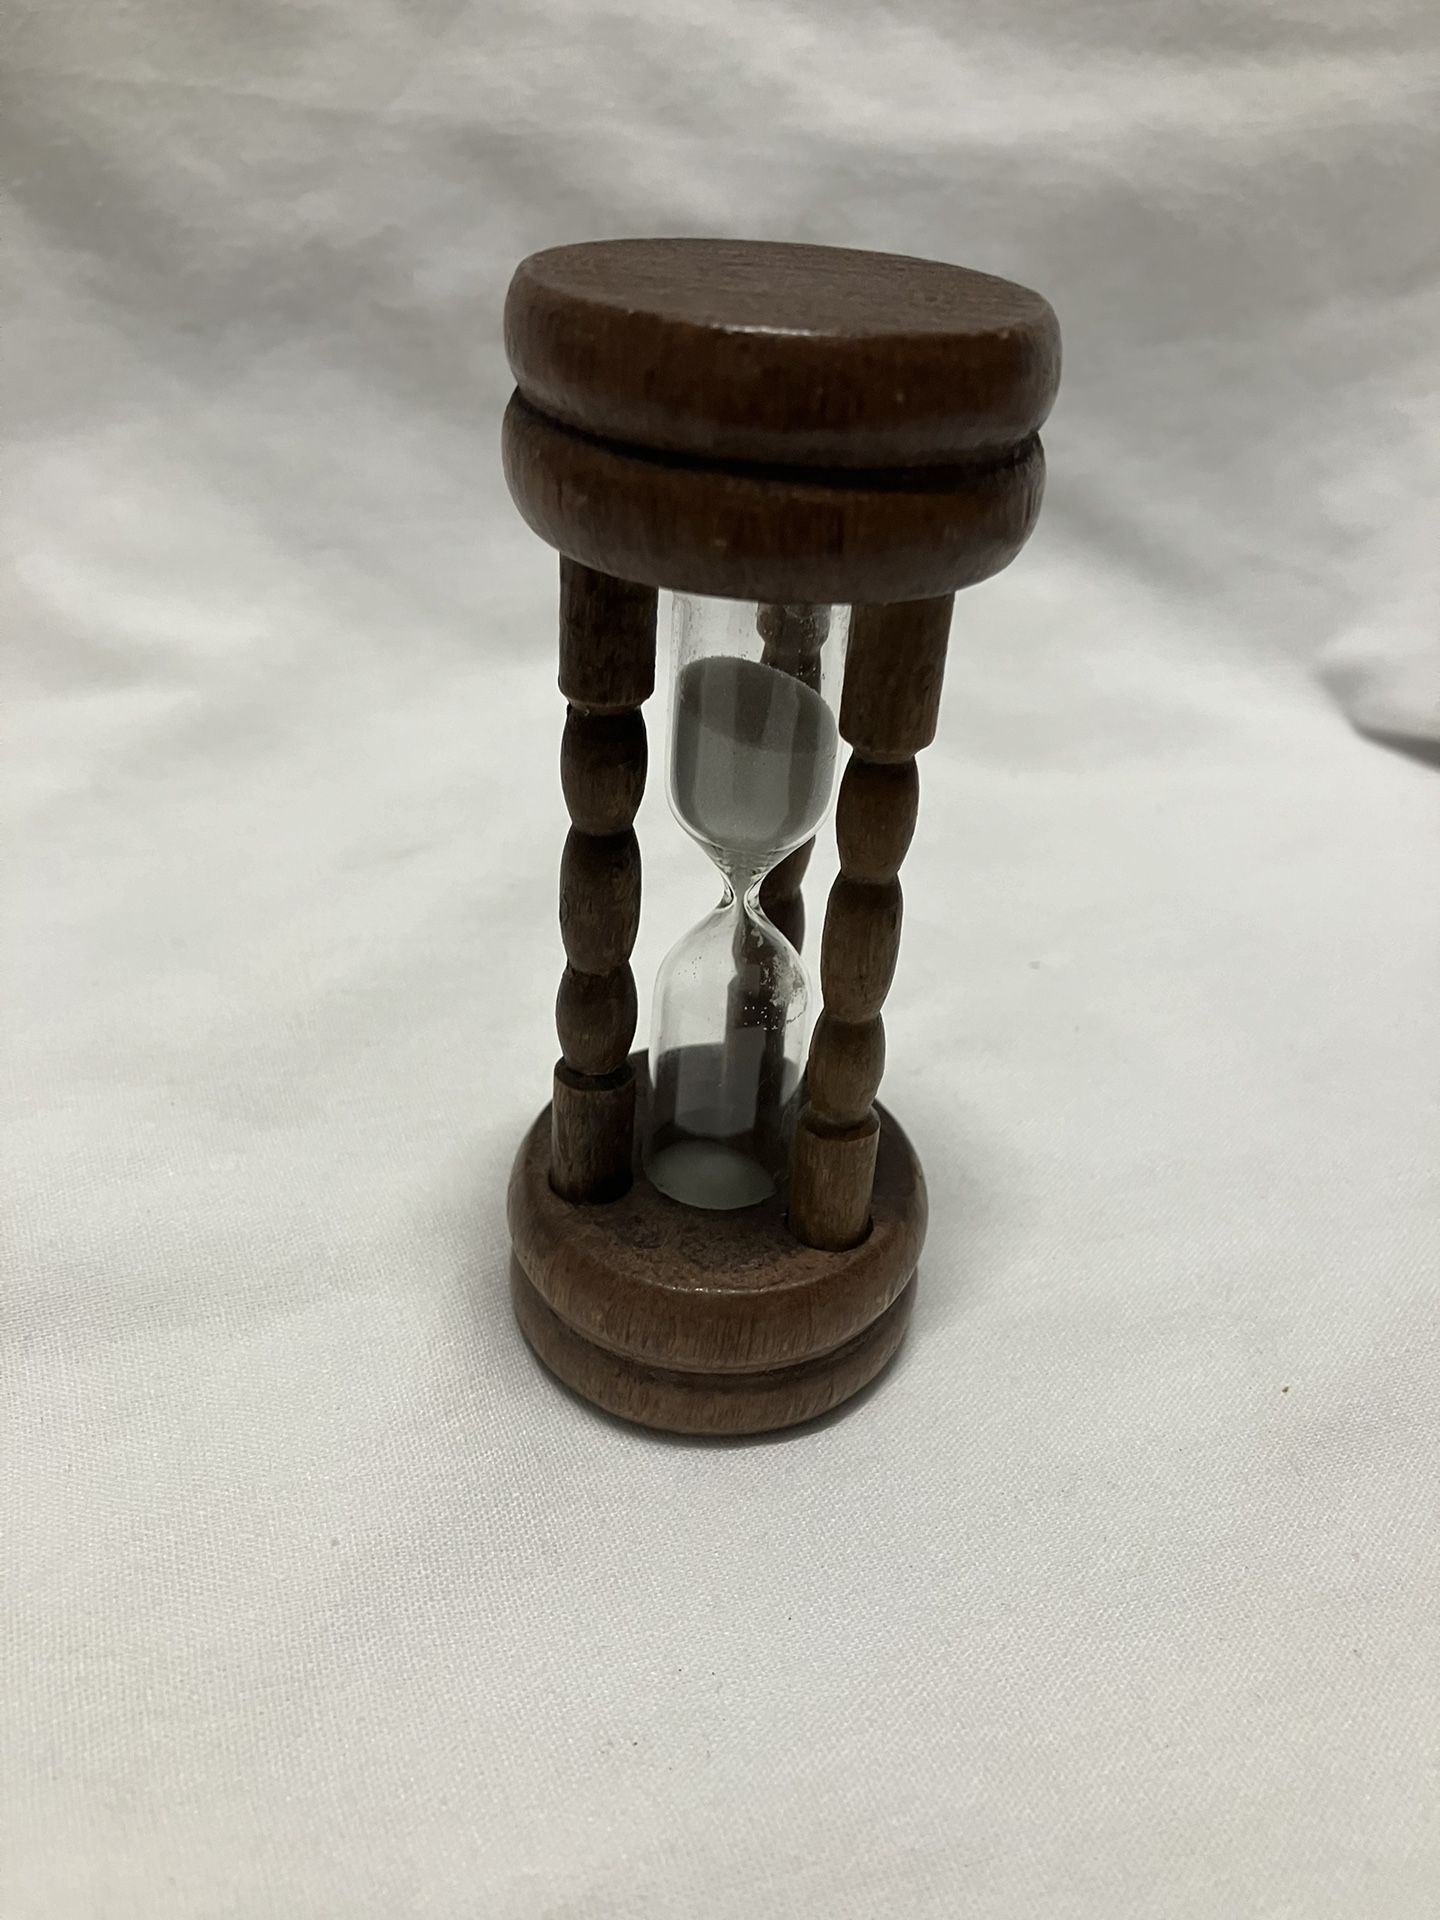 Vintage Wooden 3 Minute Hour Glass Egg Timer with White Sand